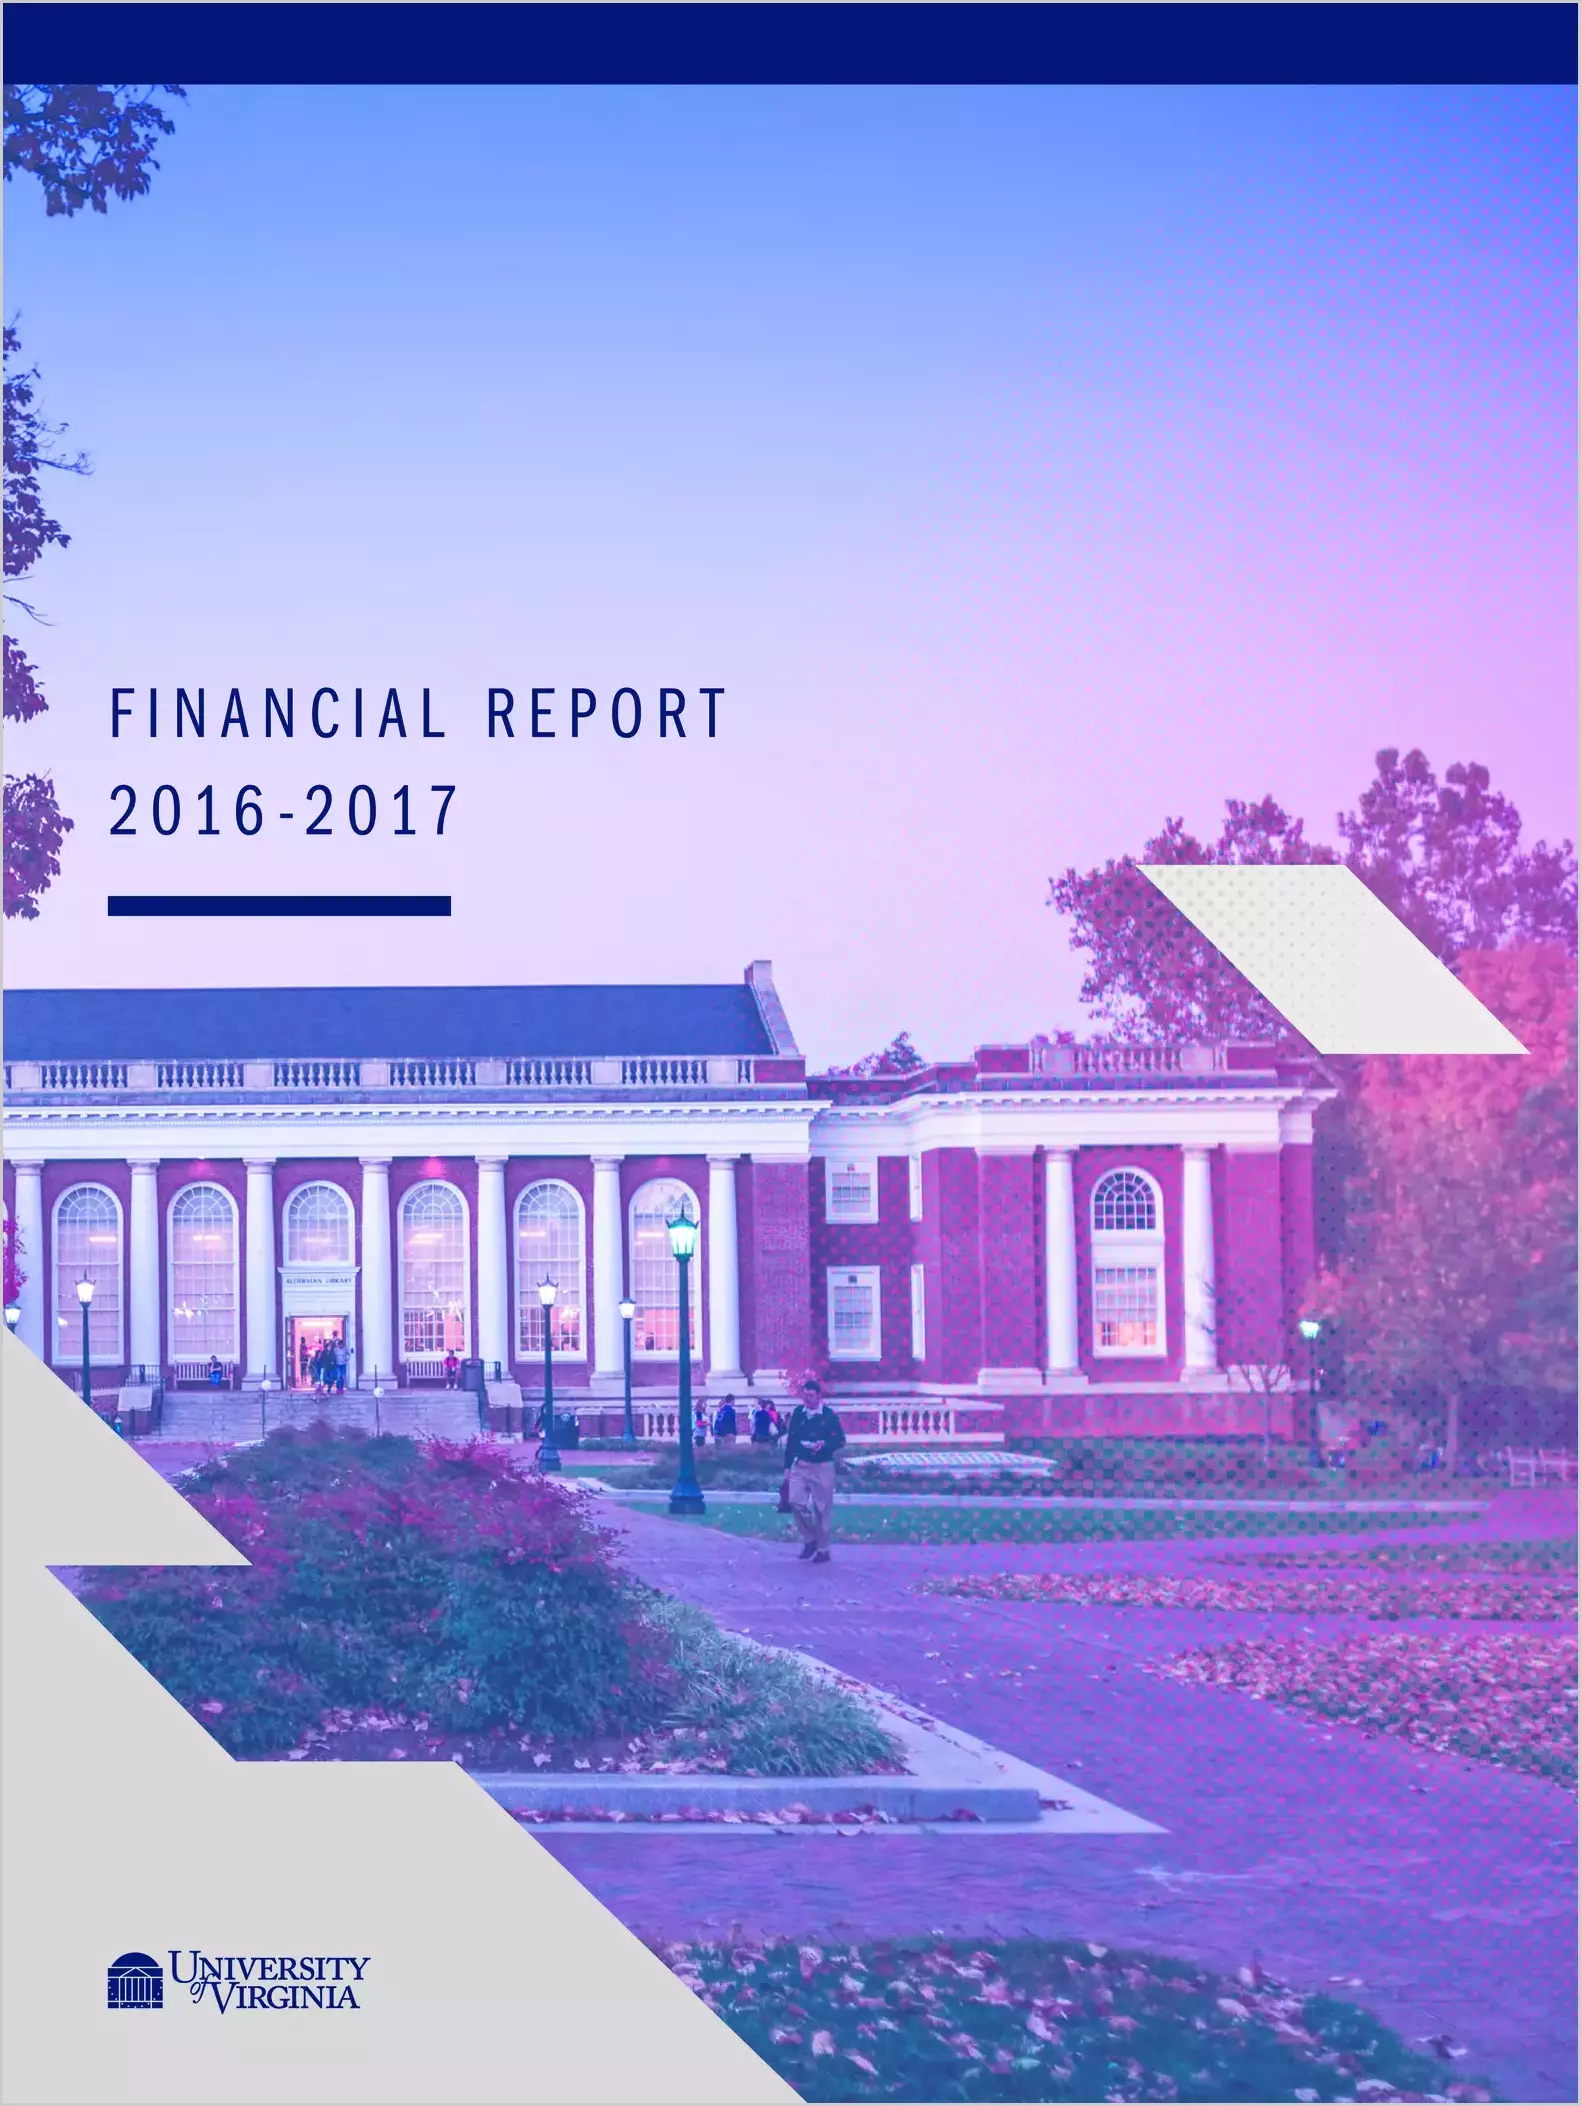 University of Virginia Financial Statement for the year ended June 30, 2017